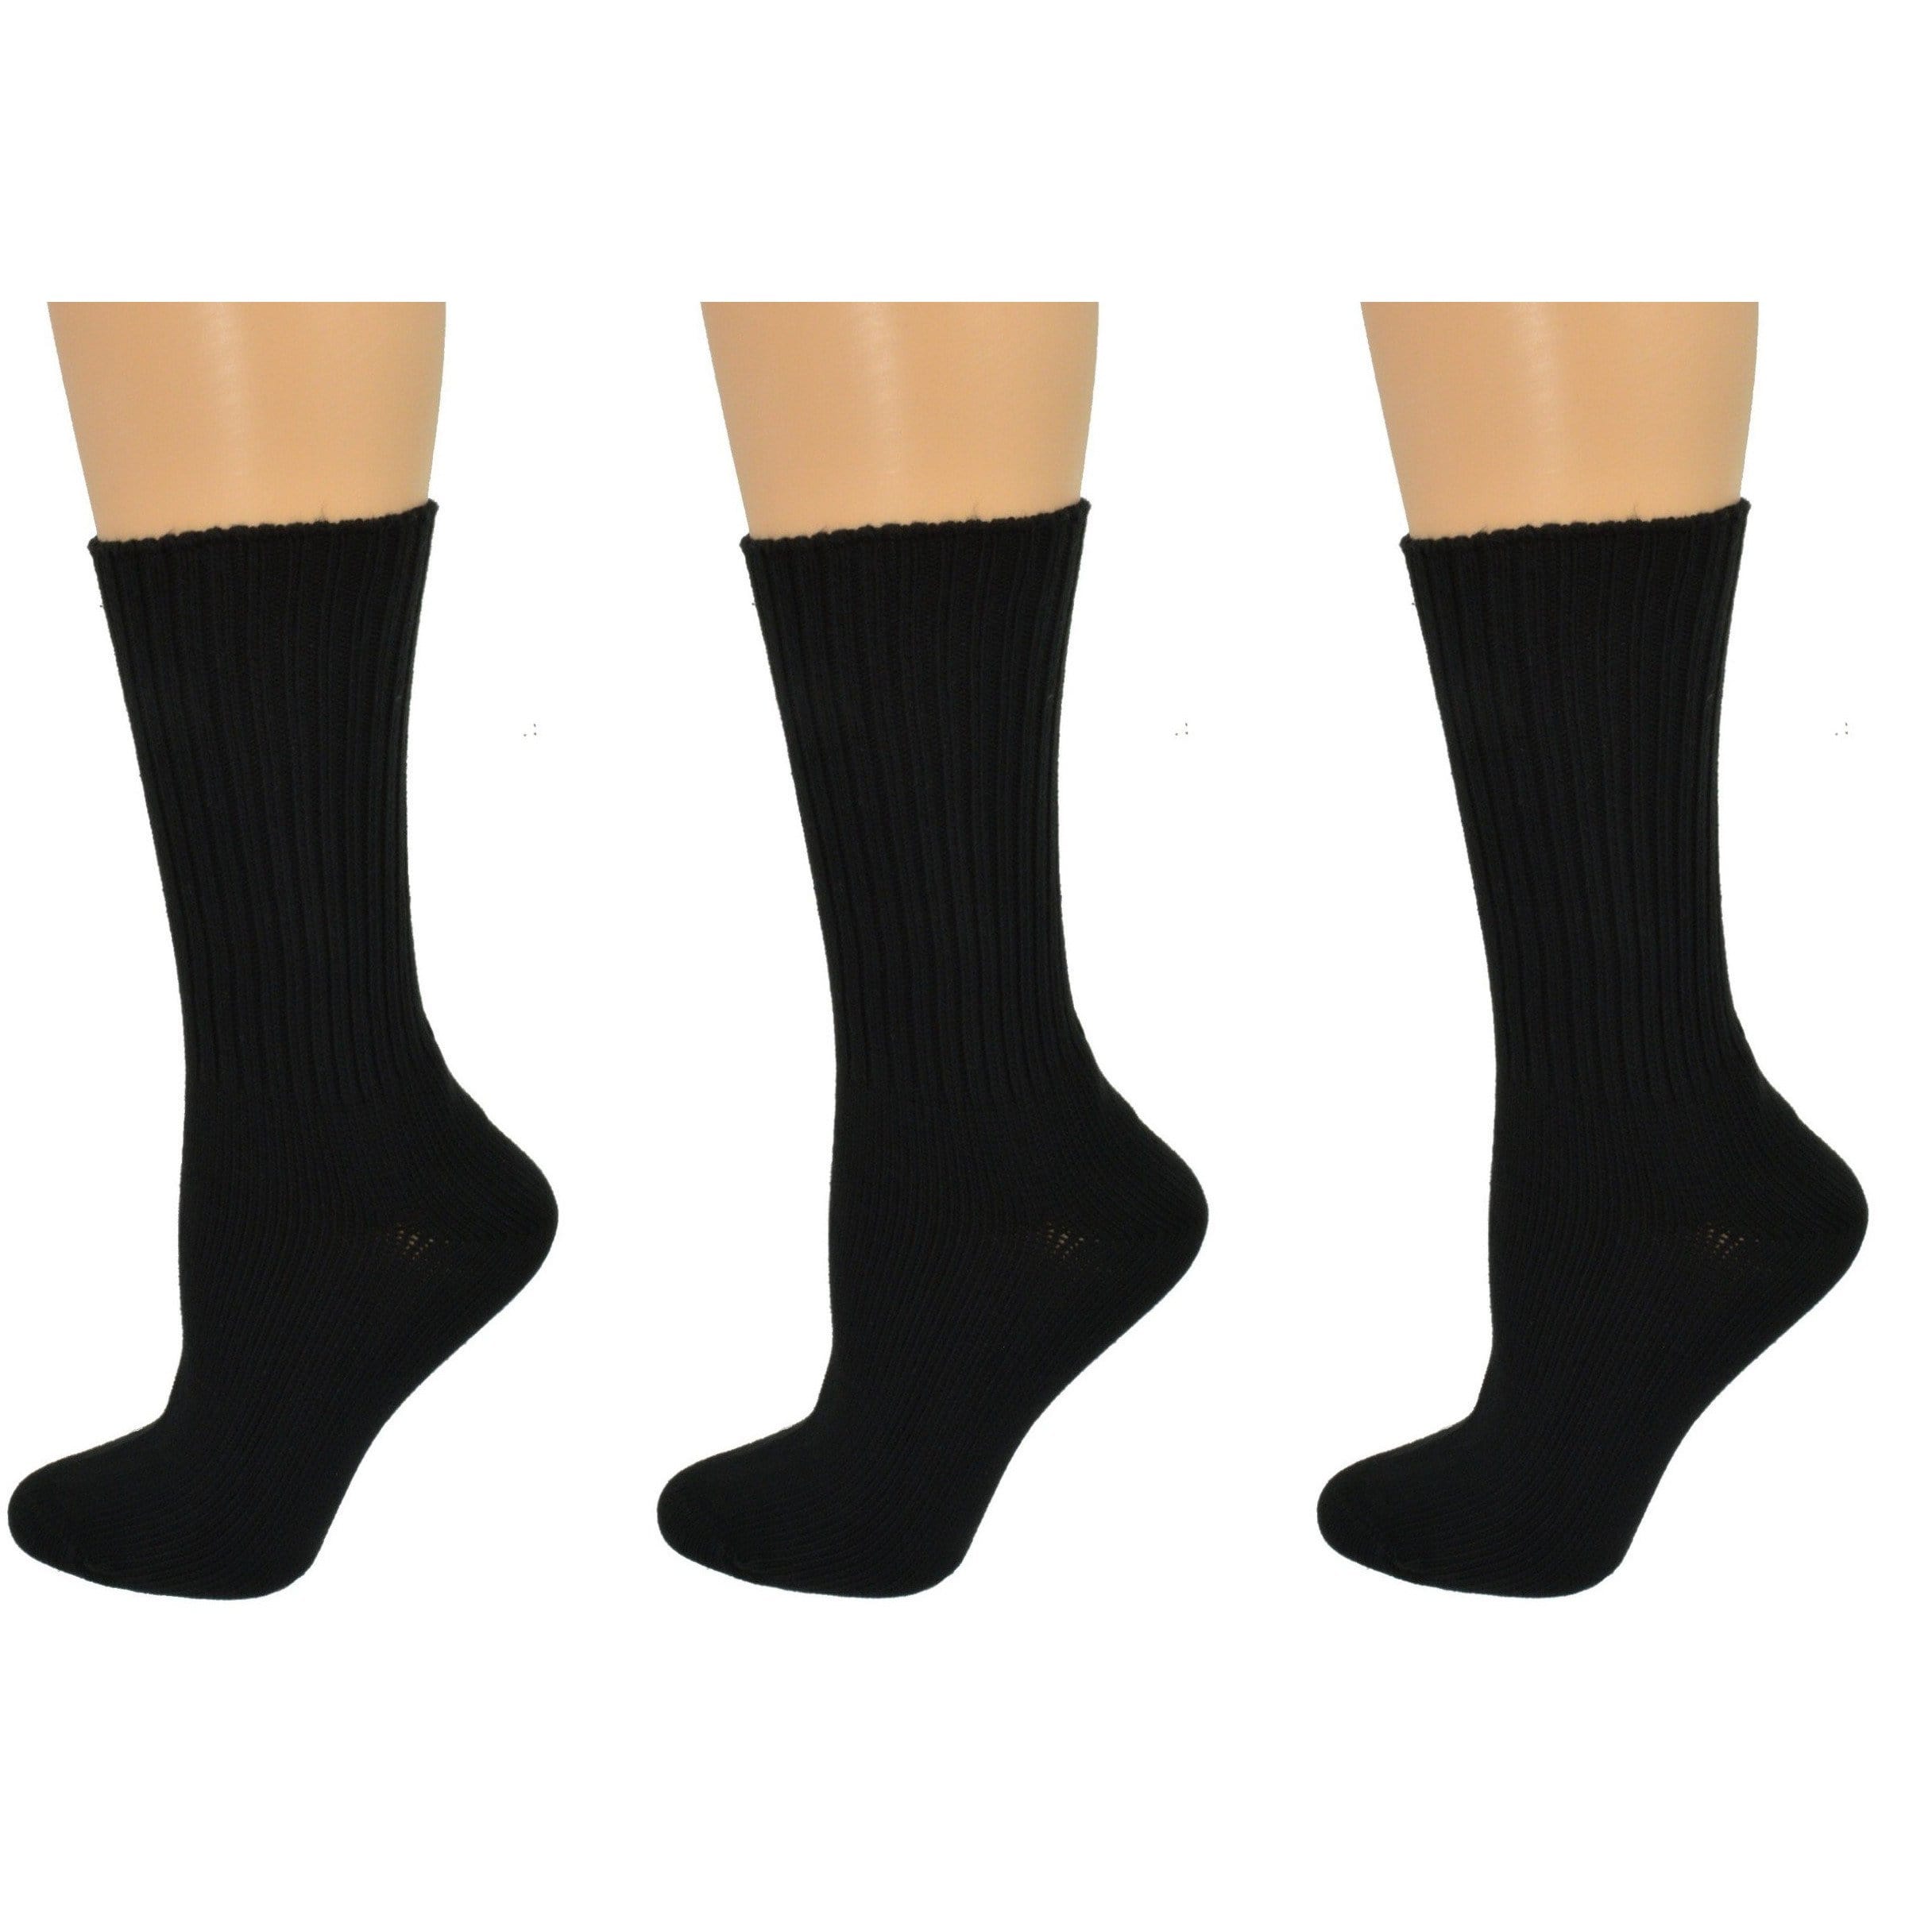 Organic Cotton Midweight Outdoor Unisex Athletic Crew Socks 3 Pair Pack W2100